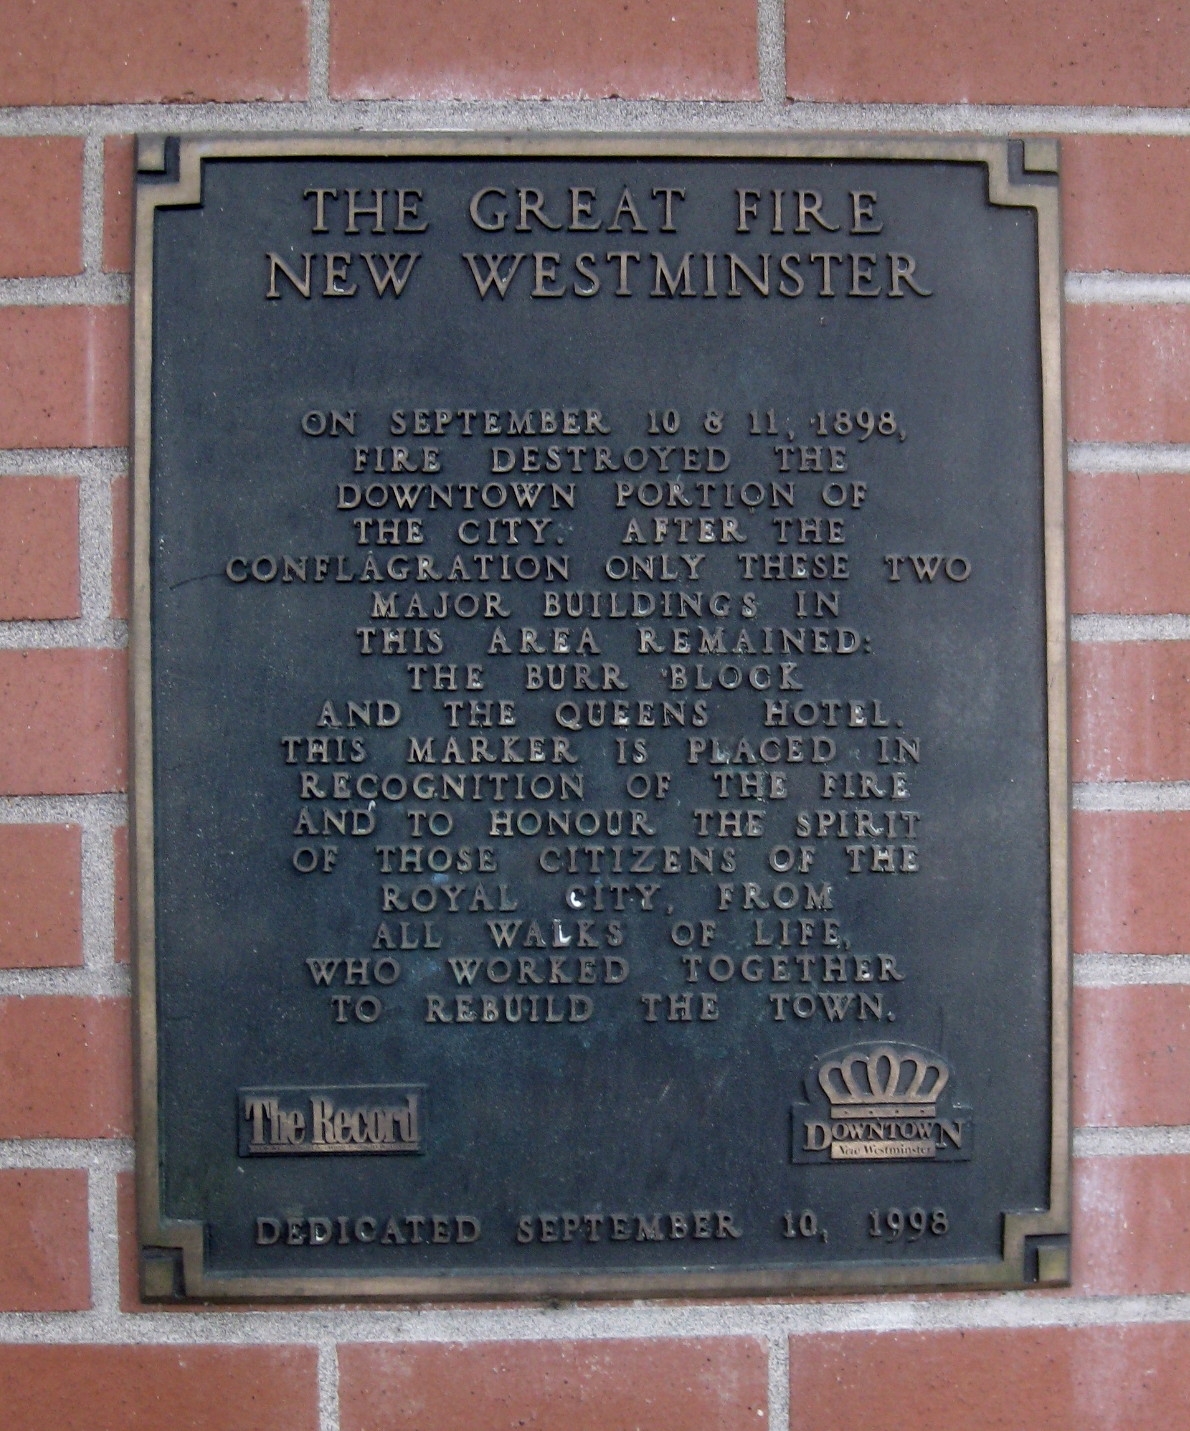 The Great Fire Marker